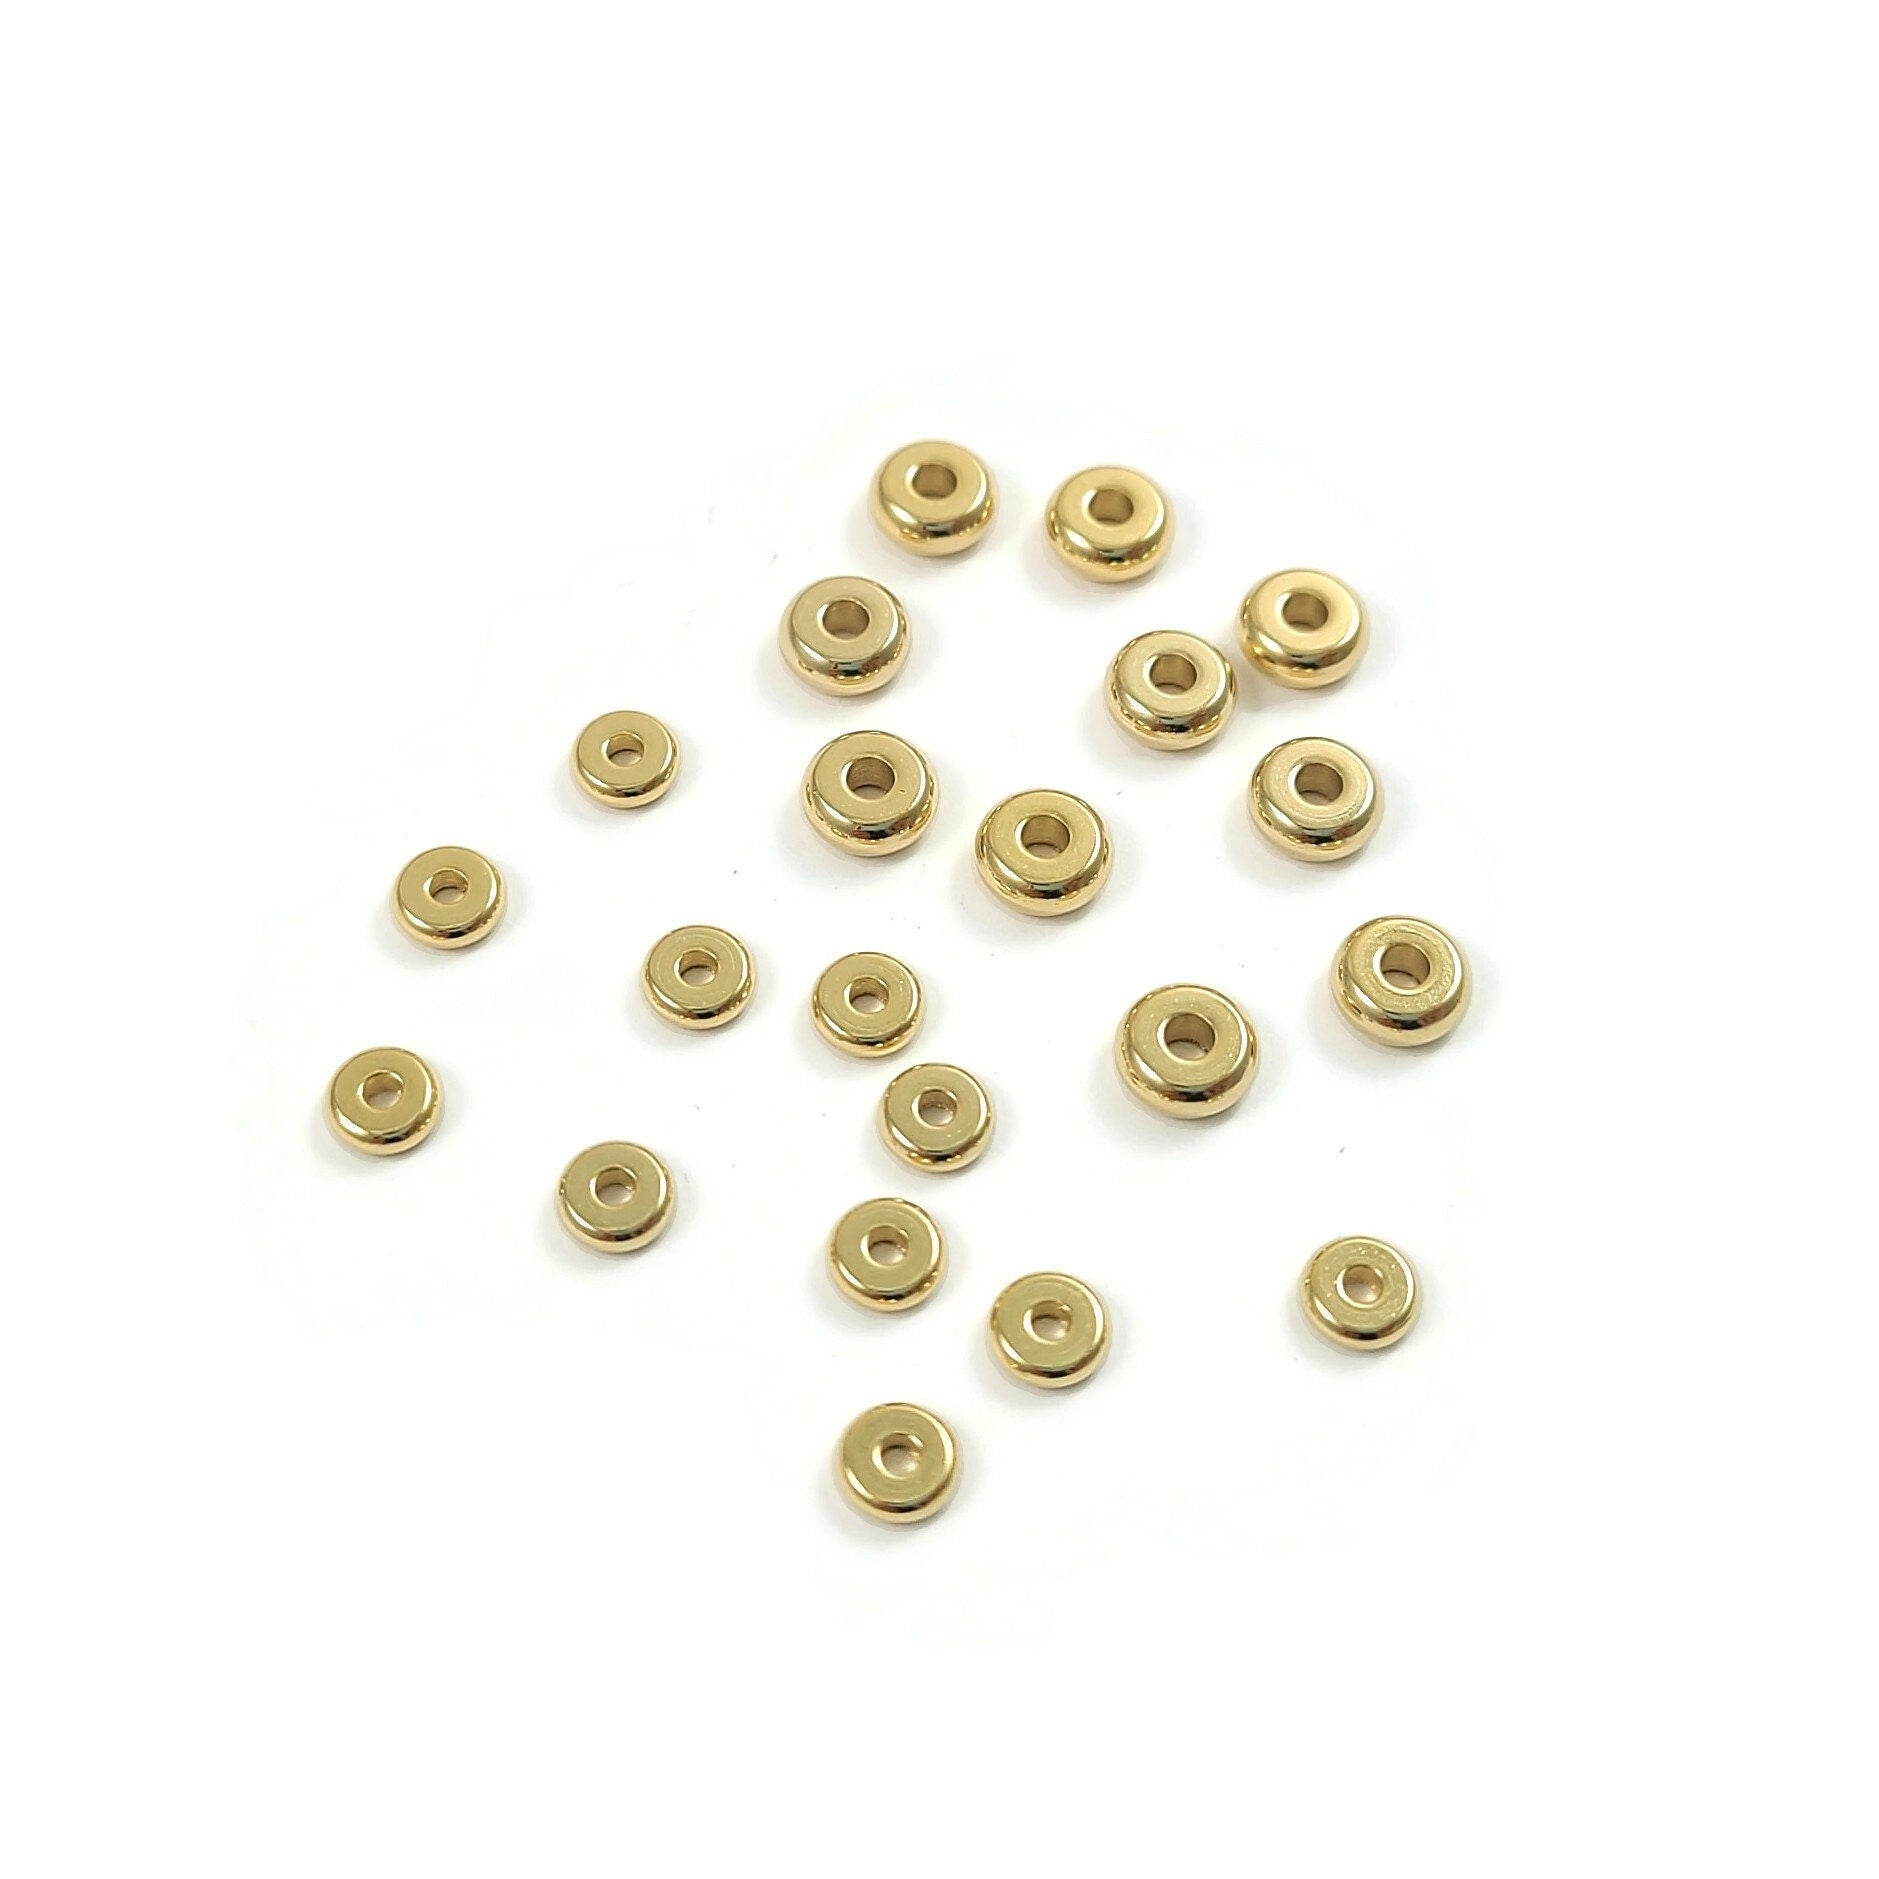 BEADIA 18K Gold Plated Round Spacer Beads 5mm 60pcs for Jewelry Making  Findings Non Tarnish